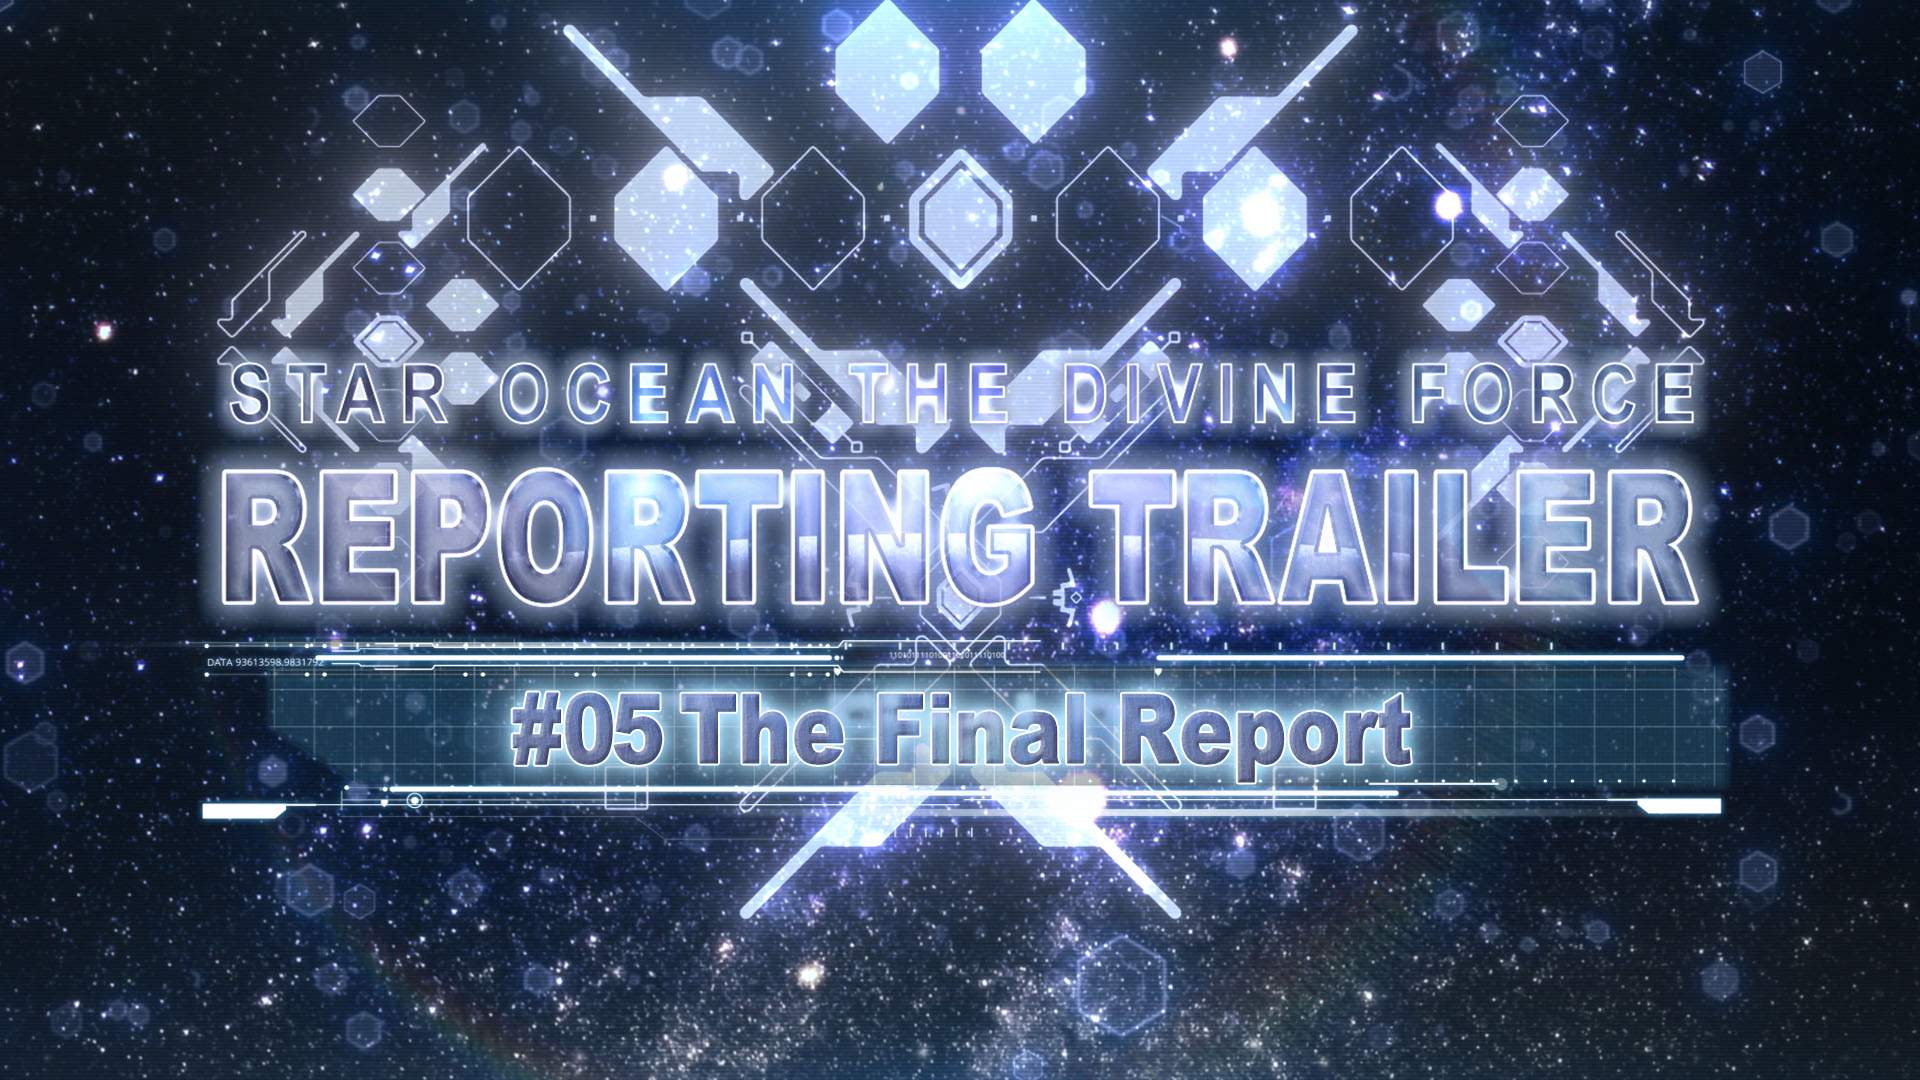 STAR OCEAN THE DIVINE FORCE – The Final Report